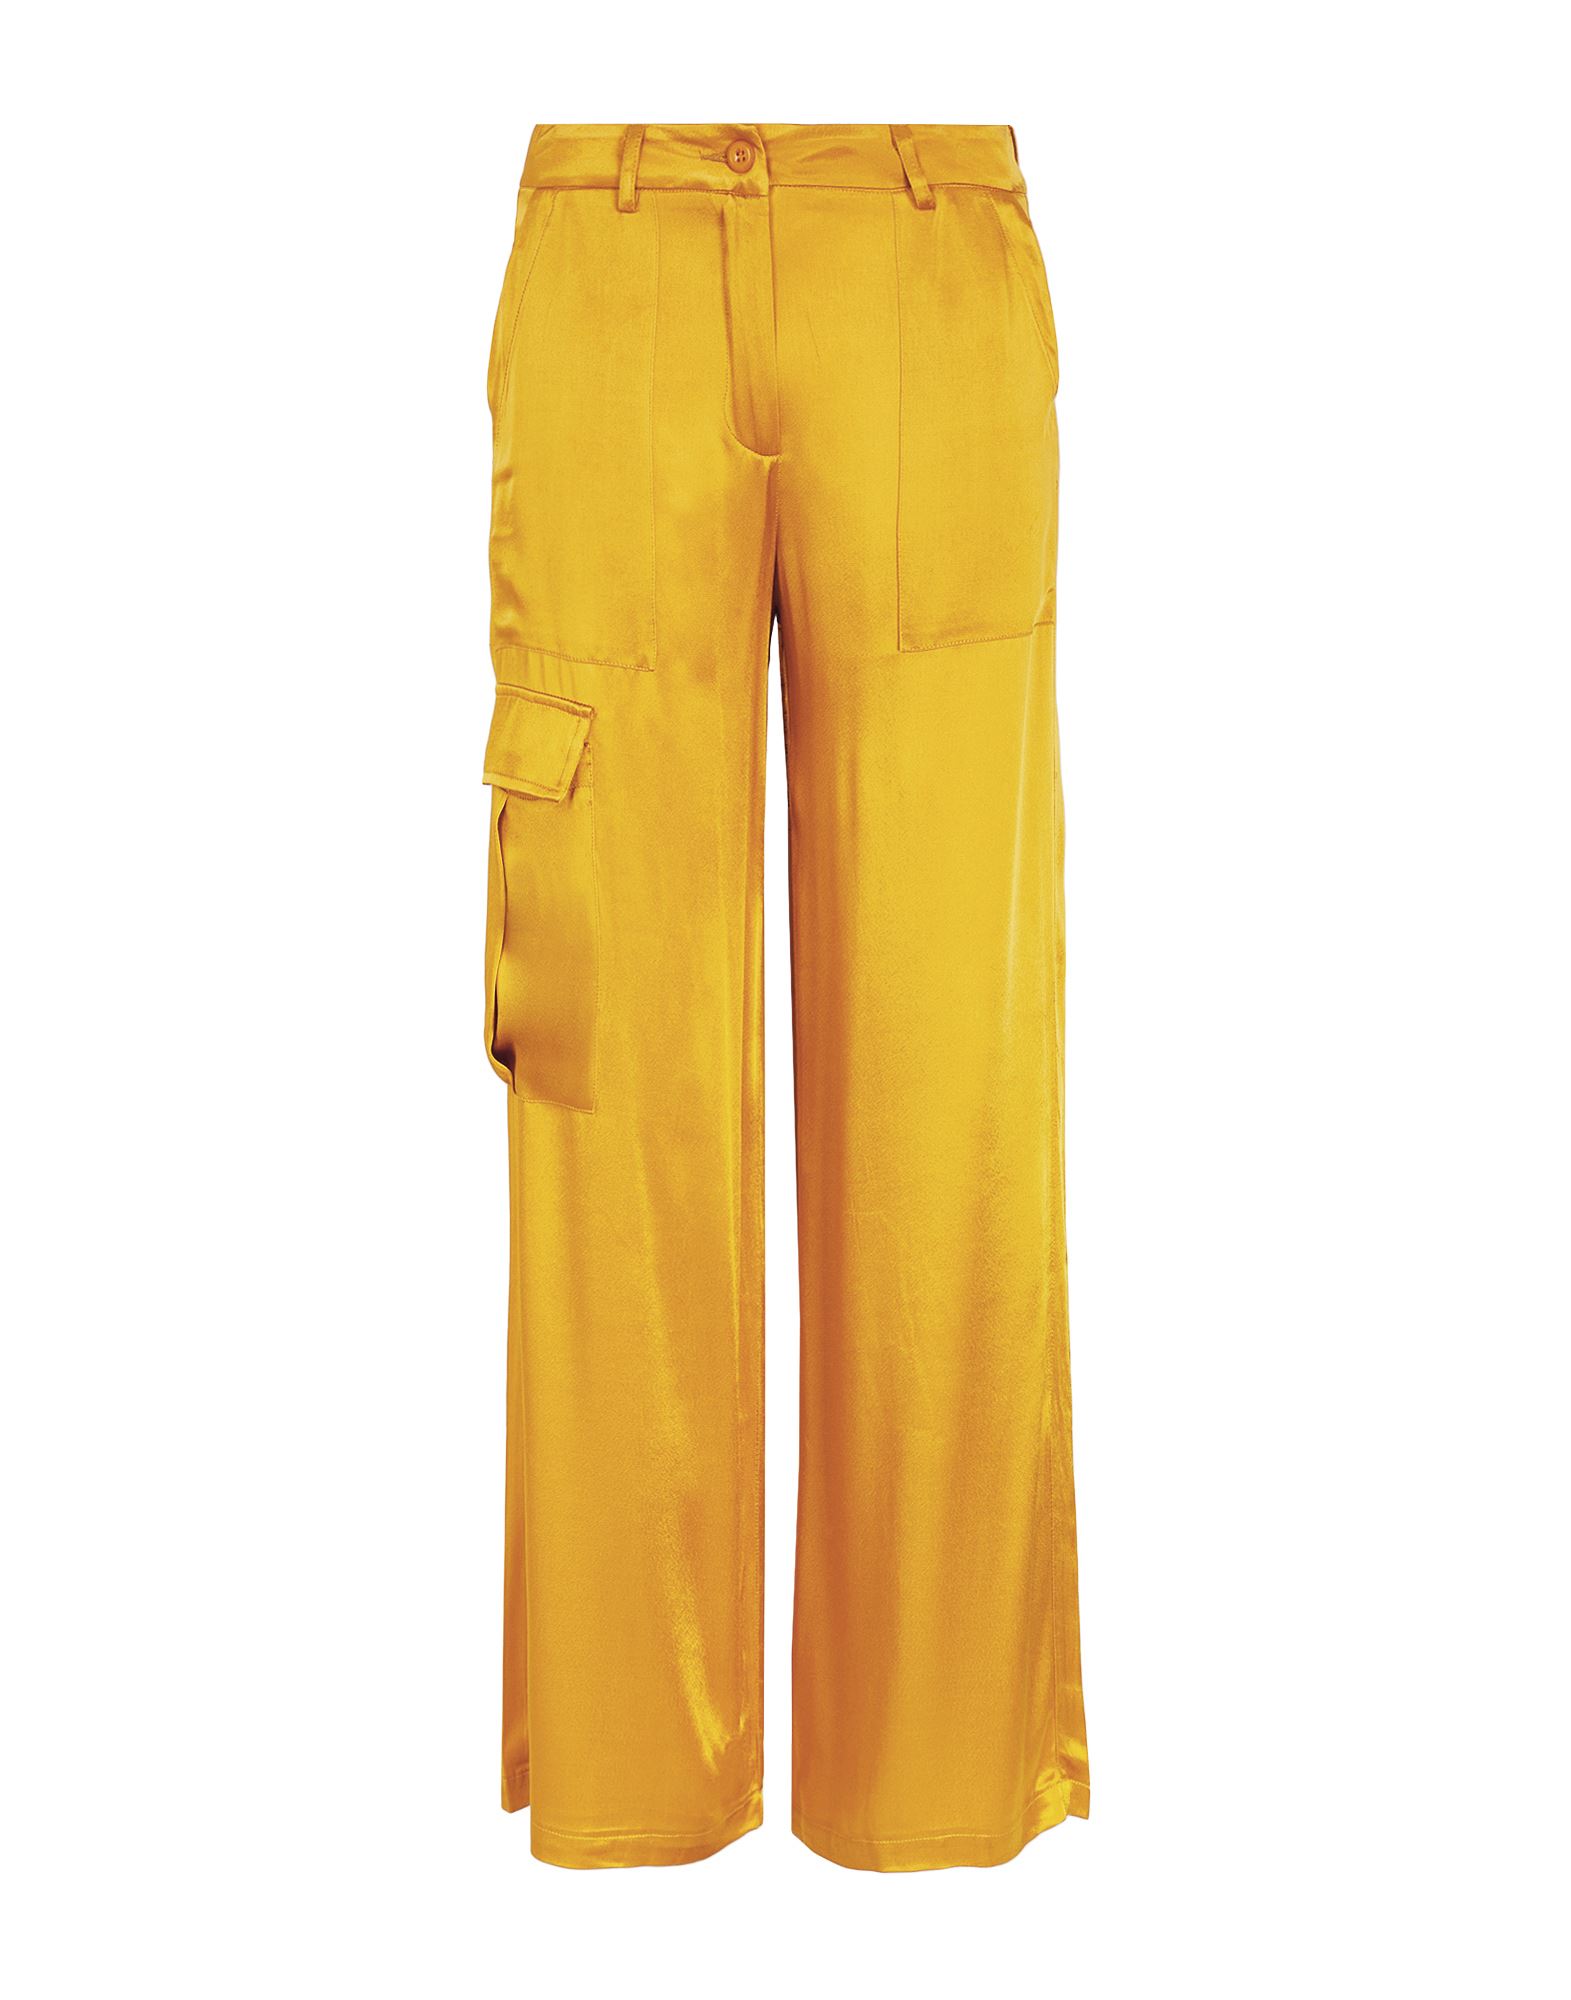 8 By Yoox Pants In Yellow